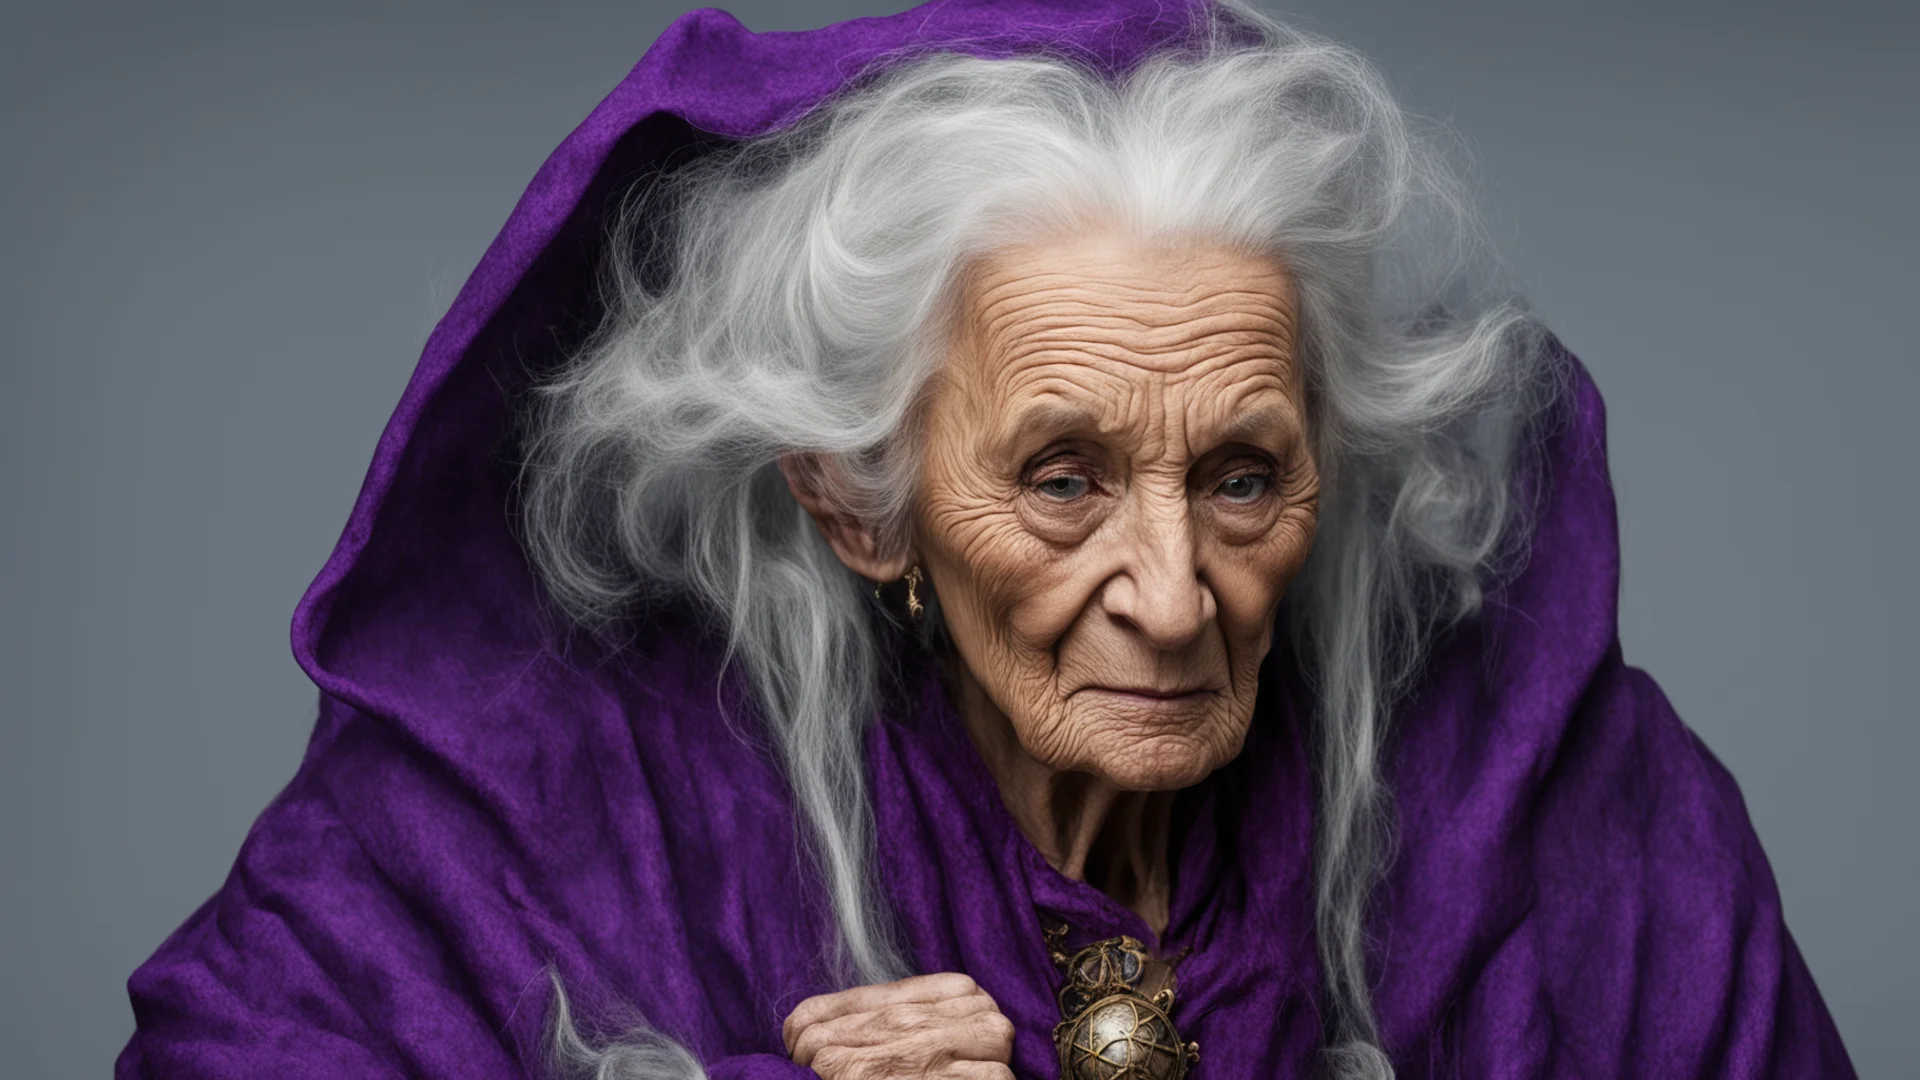 sorcerer old woman amazing awesome portrait 2 wide